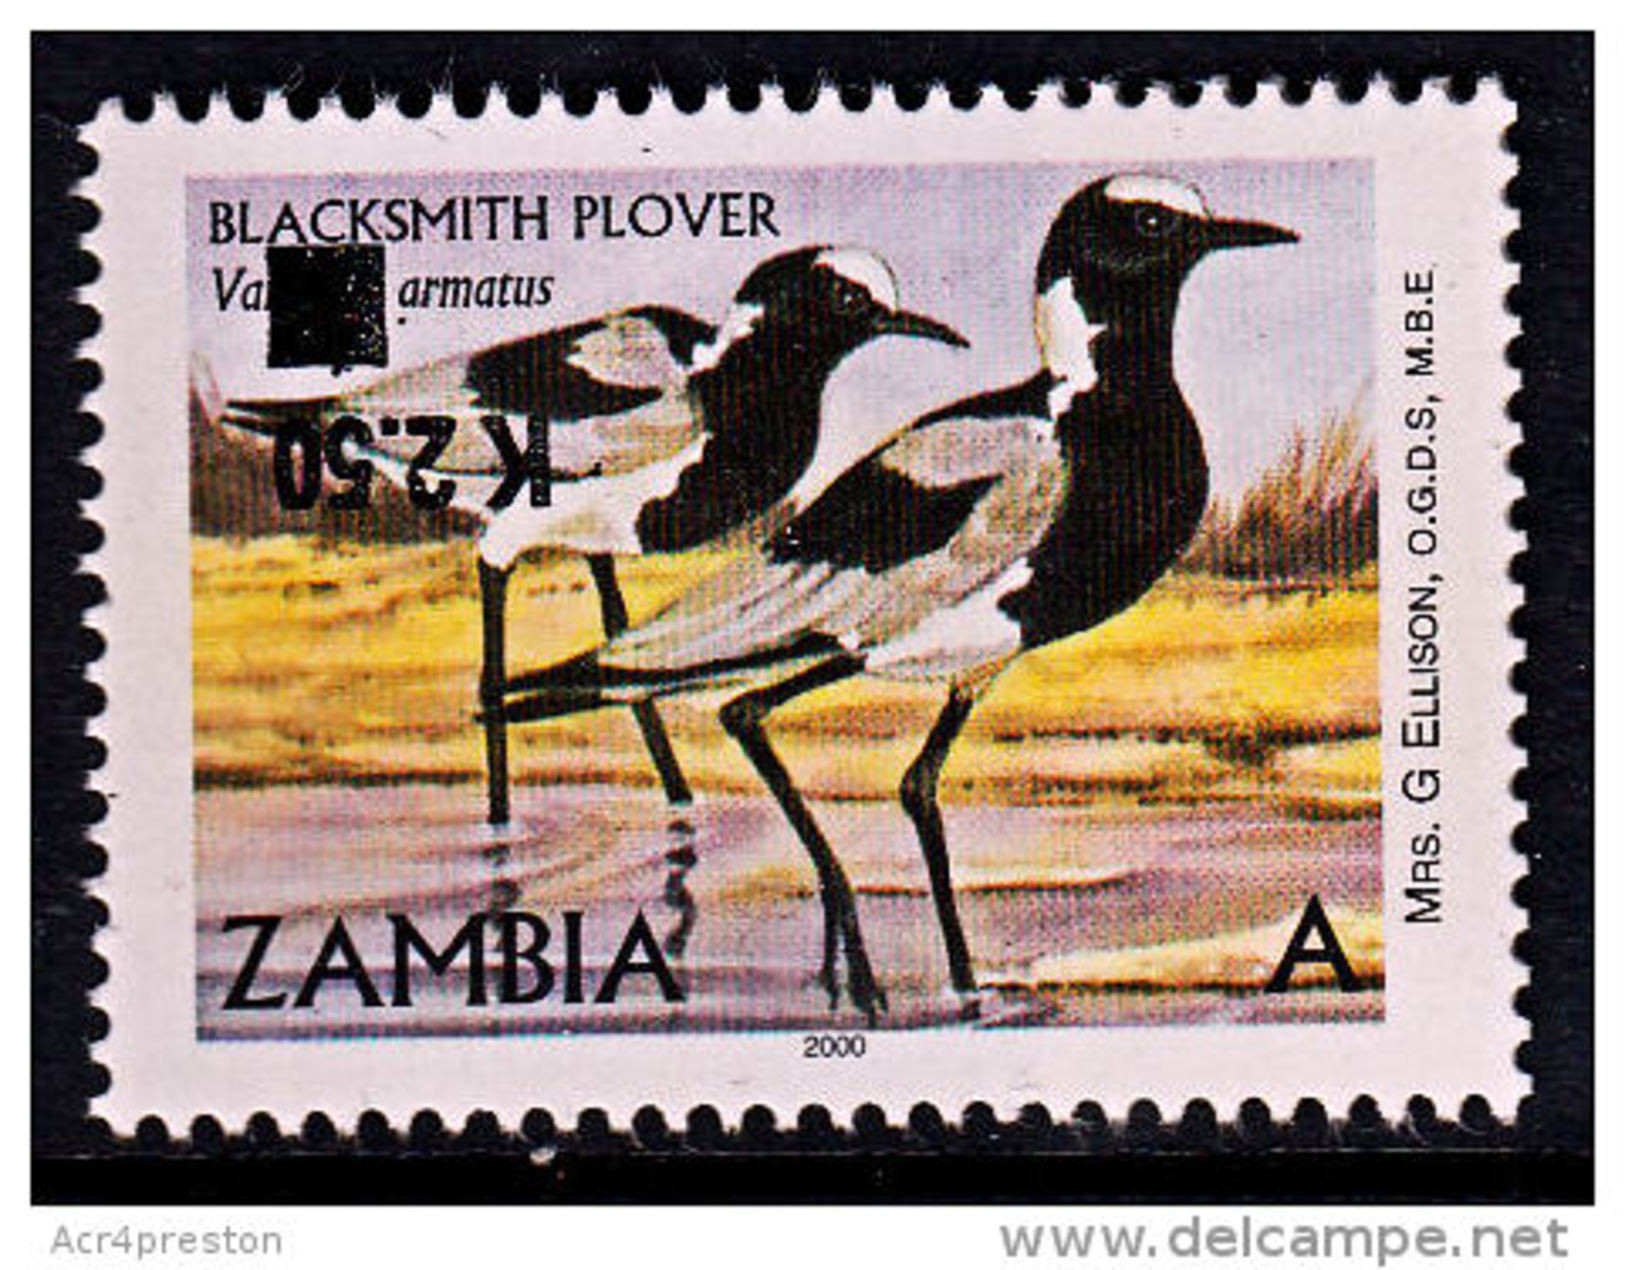 Zm1126a ZAMBIA 2014, K2.50 INVERTED Surcharge On 'A' Bird Blacksmith Plover  MNH (Issued 02-05-2014) - Zambie (1965-...)